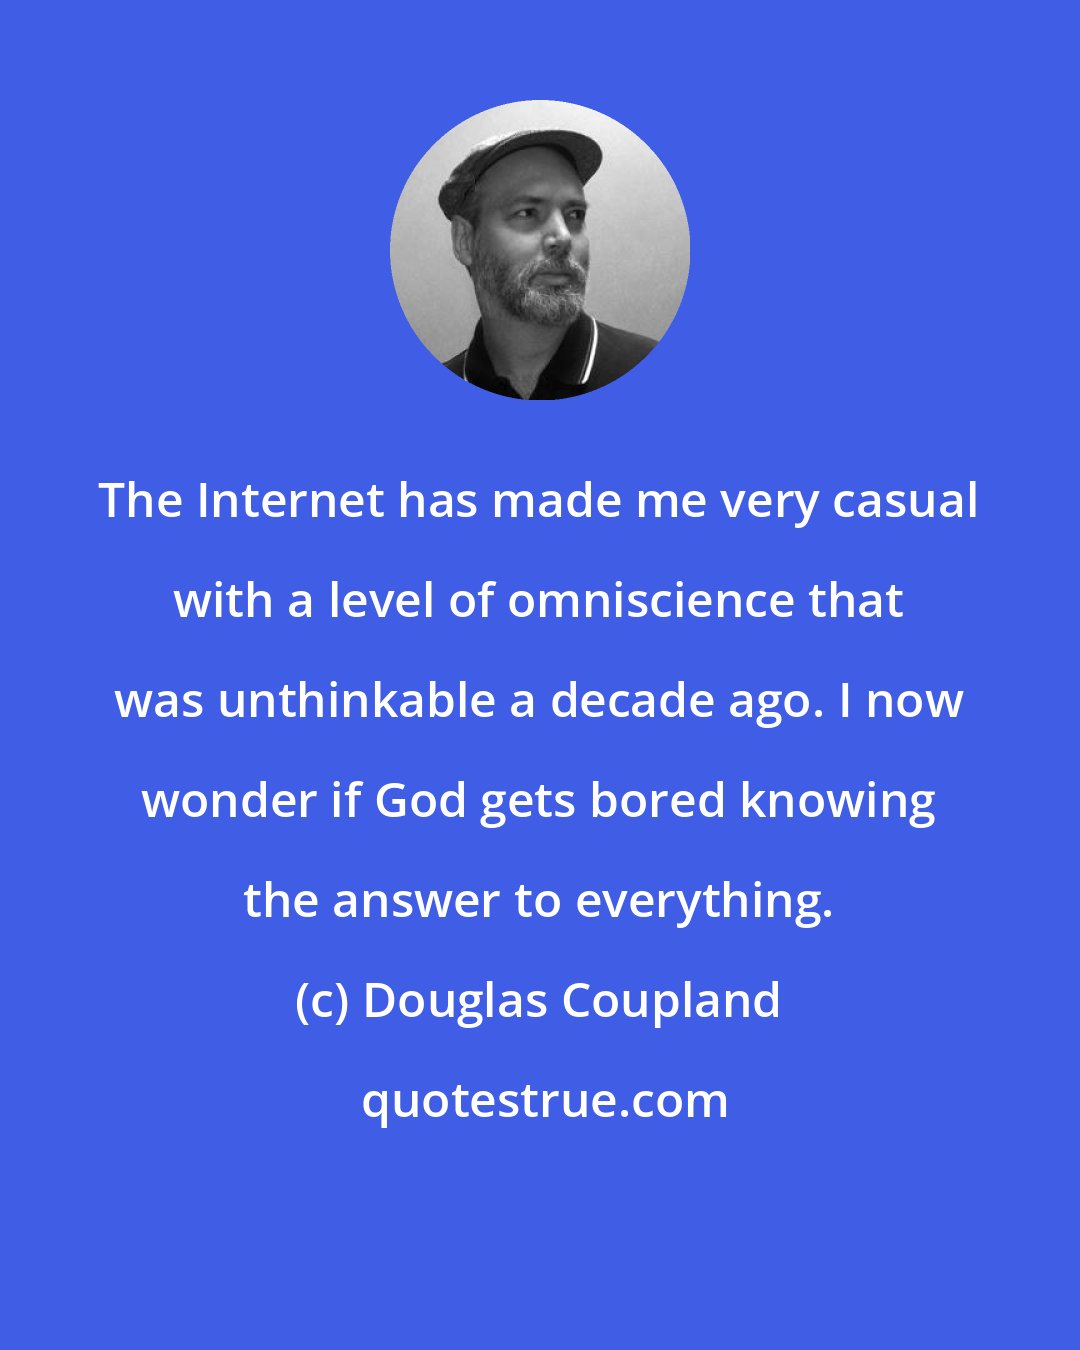 Douglas Coupland: The Internet has made me very casual with a level of omniscience that was unthinkable a decade ago. I now wonder if God gets bored knowing the answer to everything.